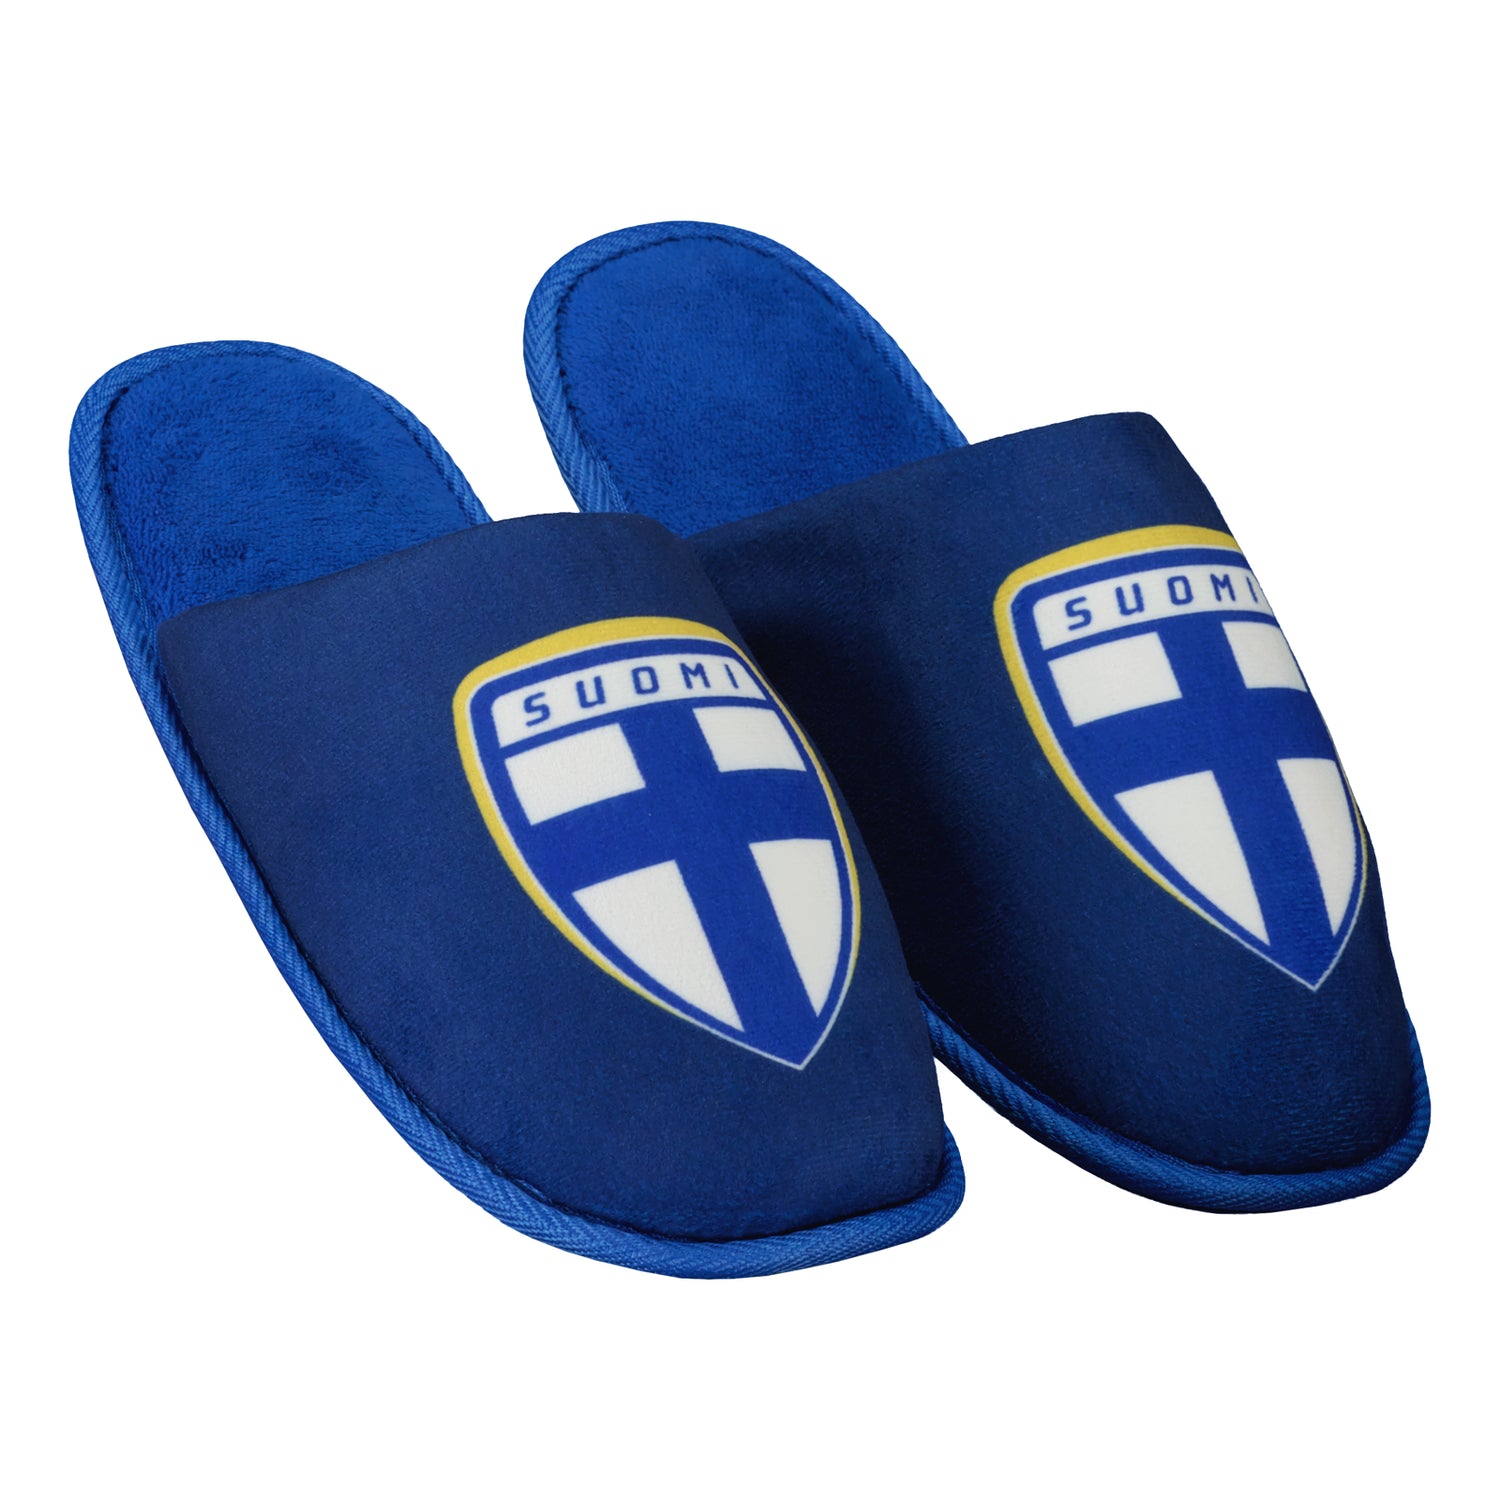 Finland Morning Slippers, Blue